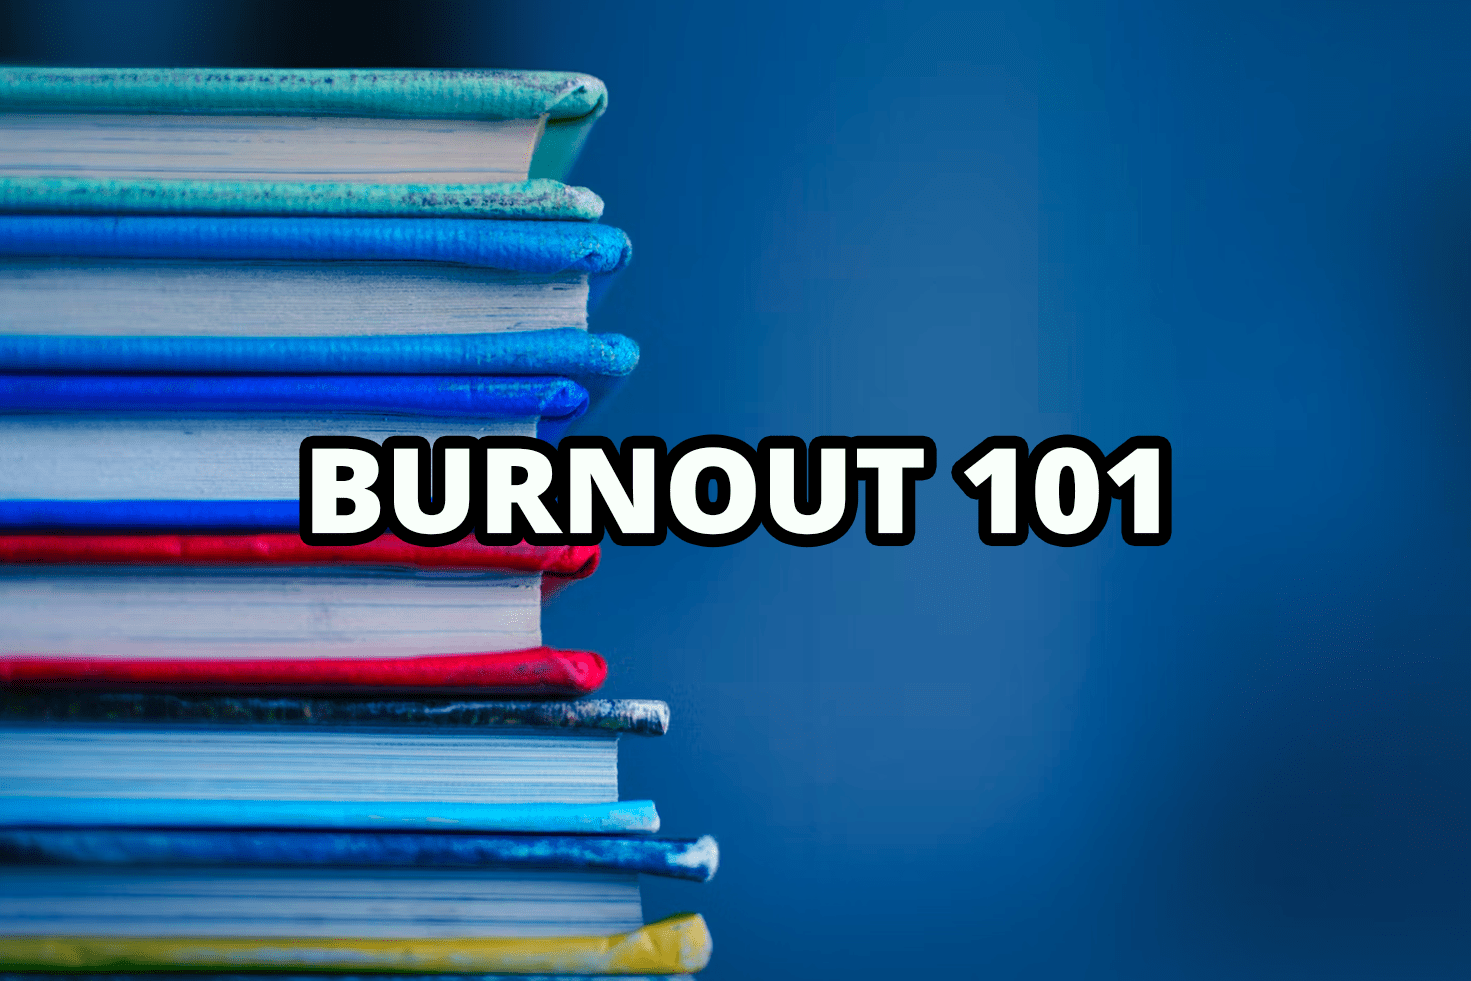 Stack of books on the left side with the text Burnout 101 written across the center of the image